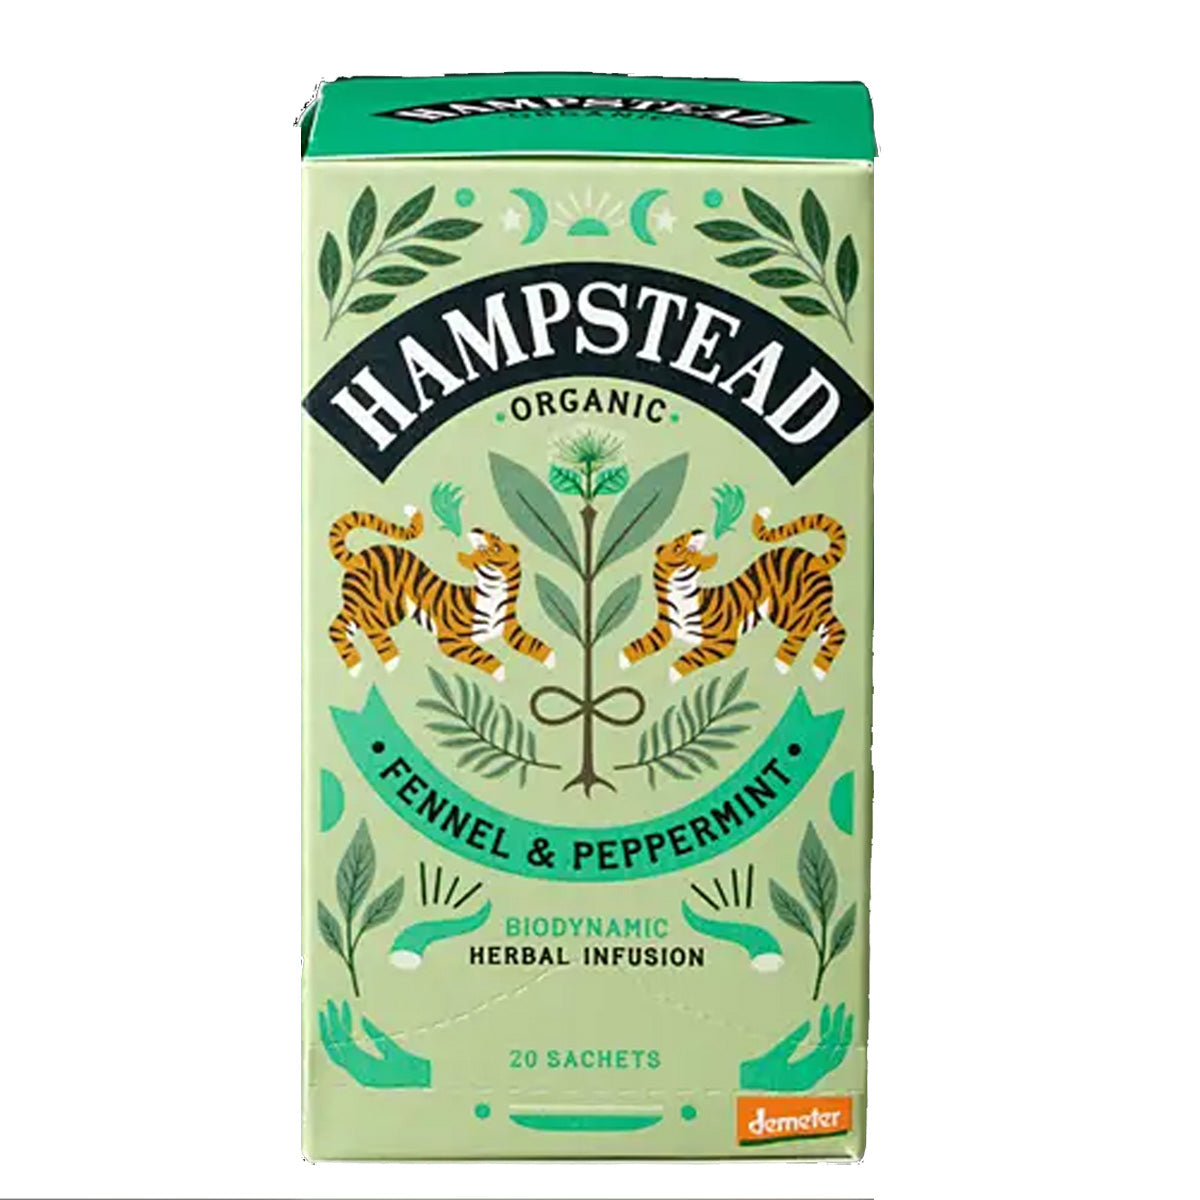 fennel and peppermint : Hampstead organic tea bags